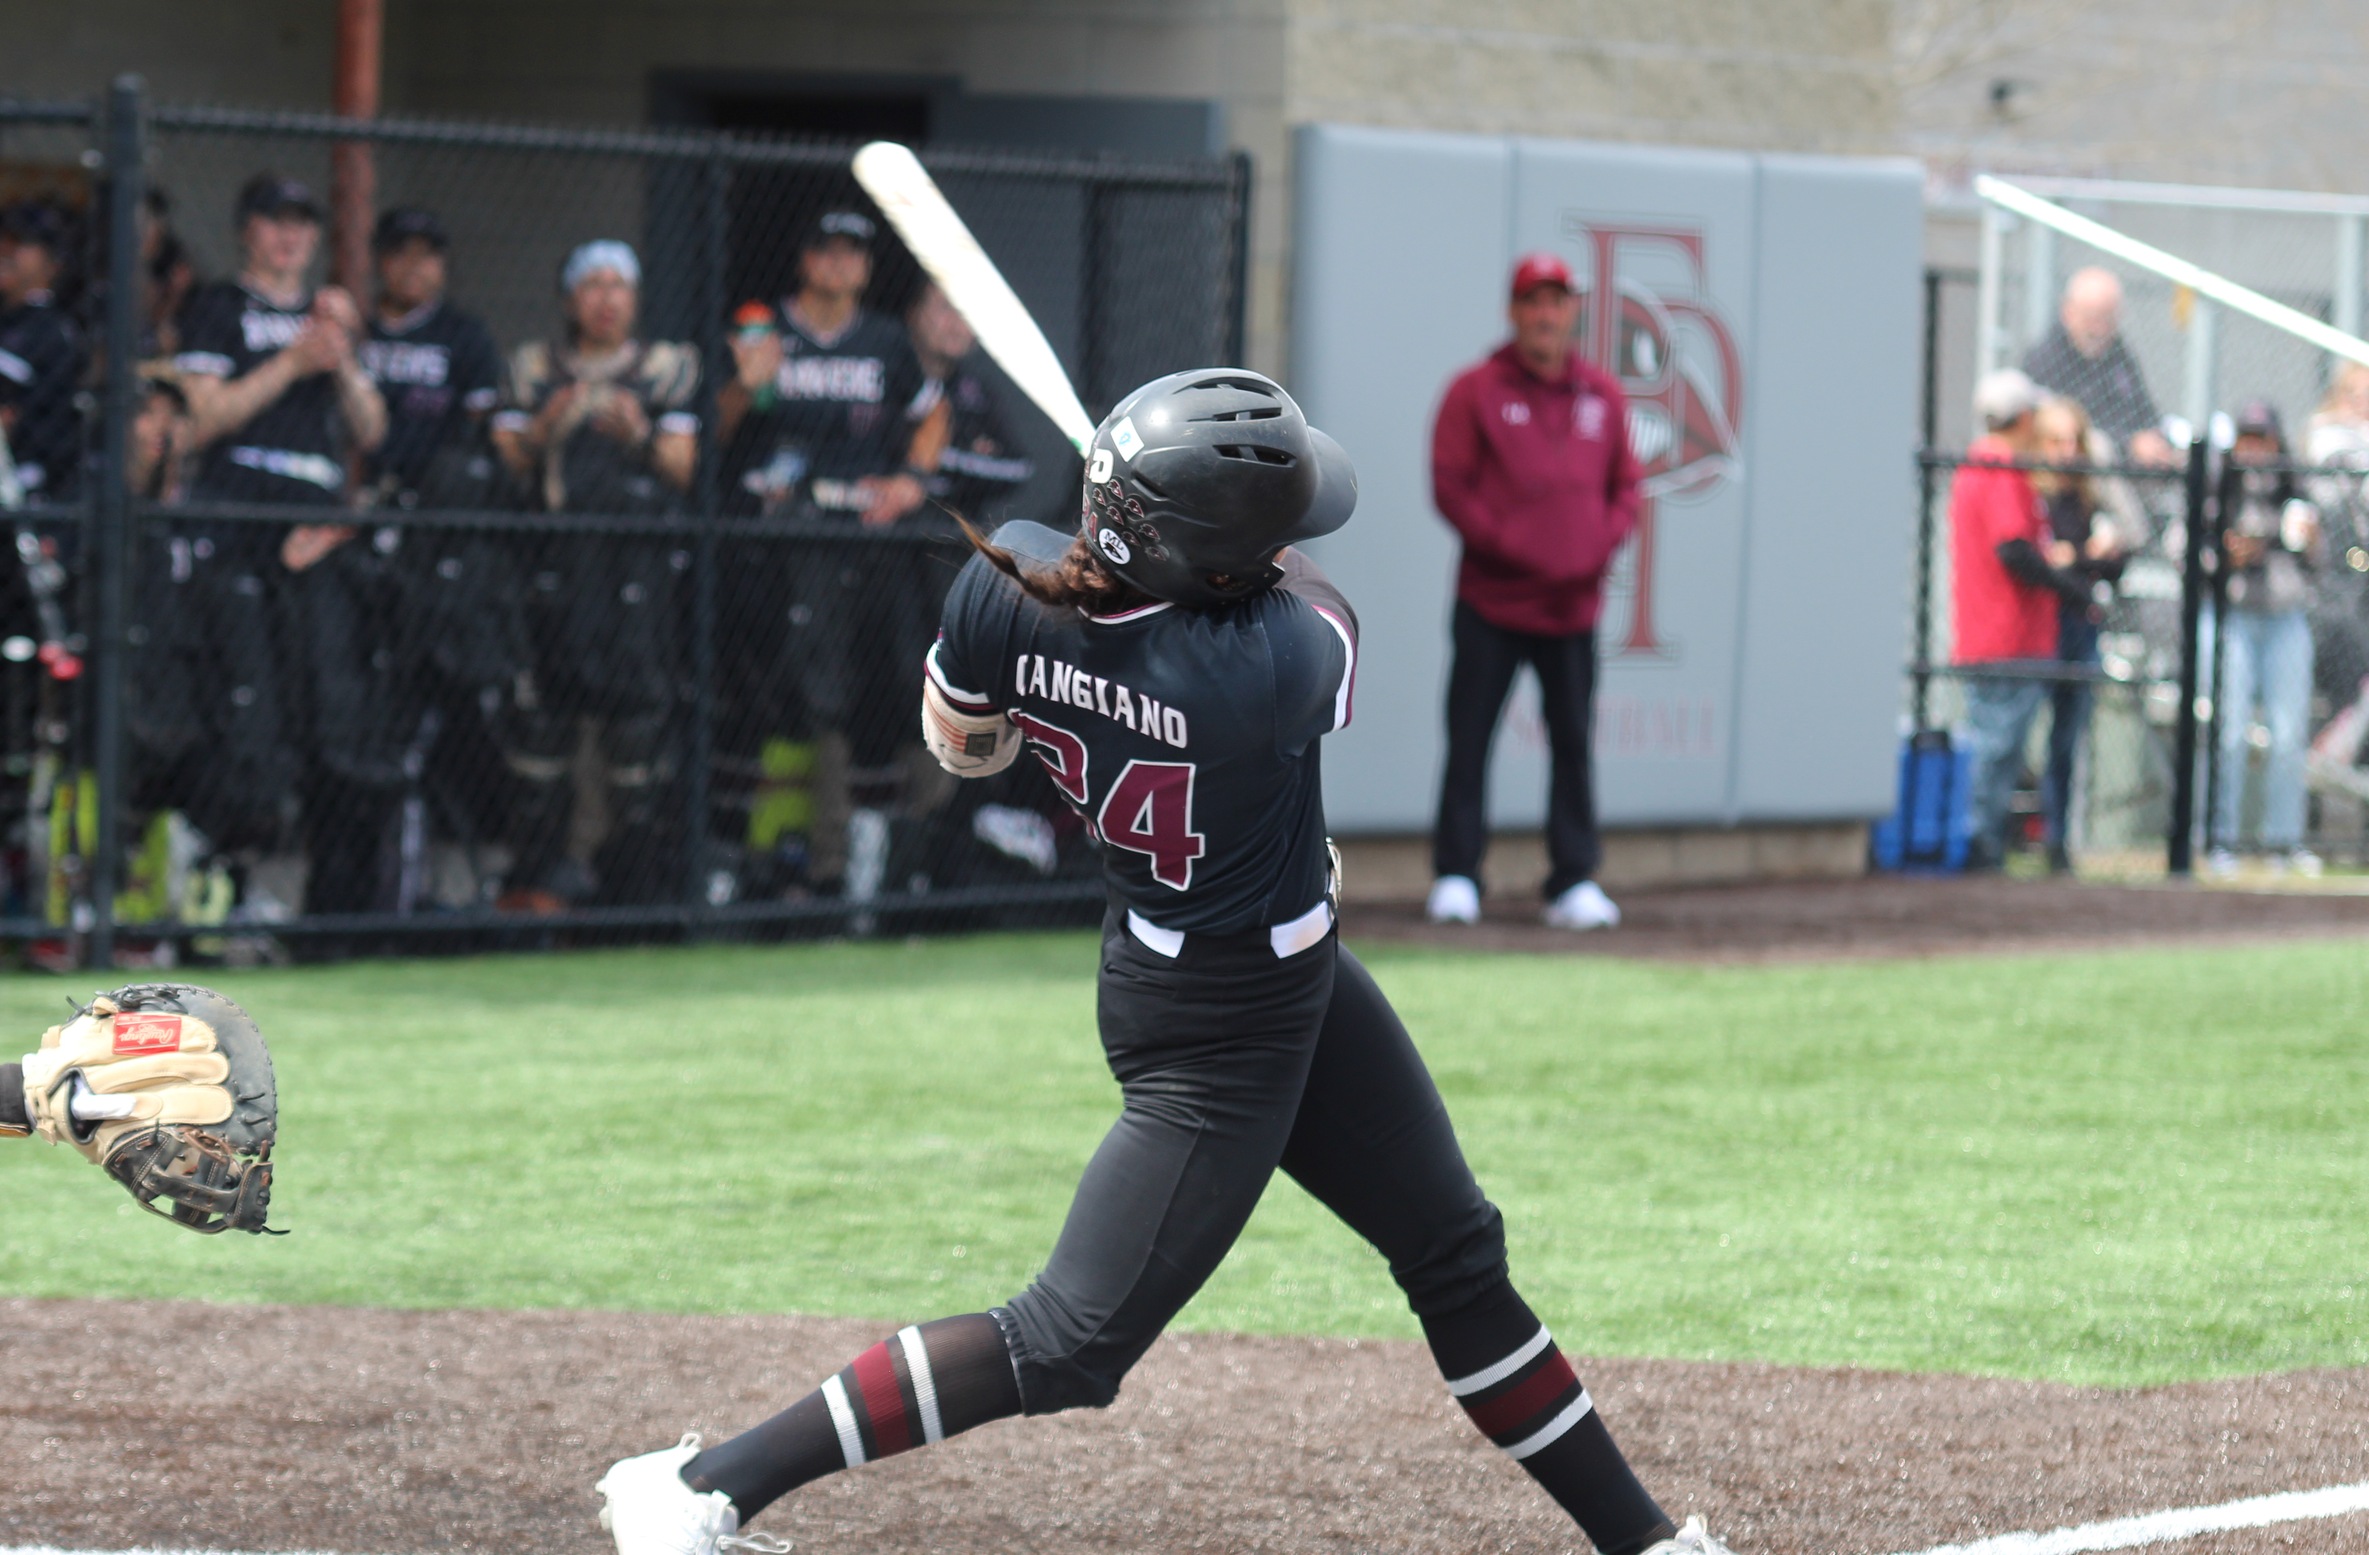 Softball's Ashley Cangiano Tabbed as NE10 Player of the Week